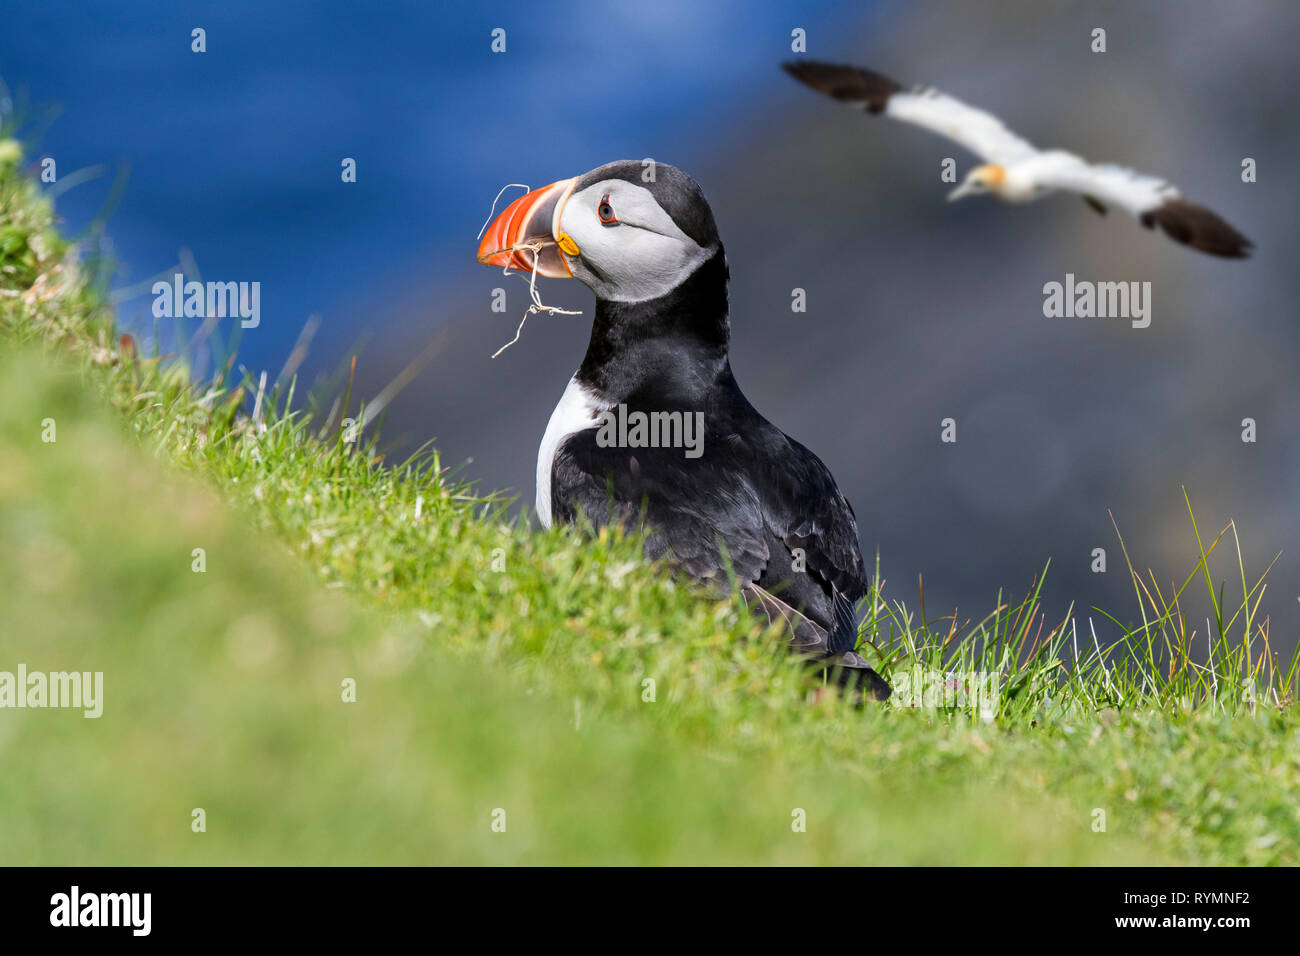 Atlantic puffin (Fratercula arctica) with grass in beak for nest building at burrow in seabird colony, Hermaness, Unst, Shetland Islands, Scotland, UK Stock Photo